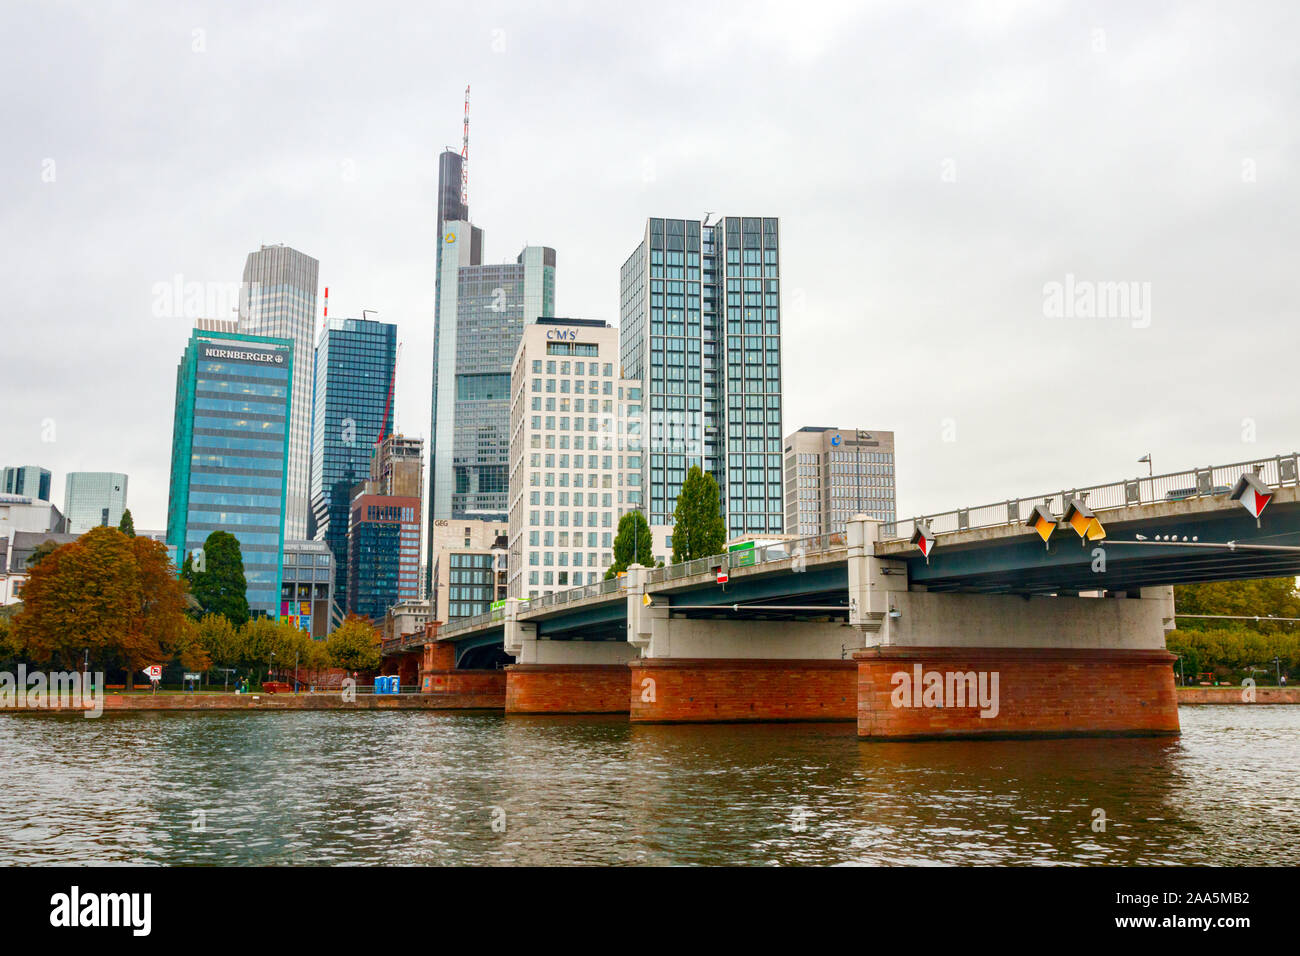 River Main with the Untermainbrucke (Lower Main Bridge) and skyscapers of the Bankenviertel (Central Business Disctrict, CBD). Frankfurt, Germany. Stock Photo